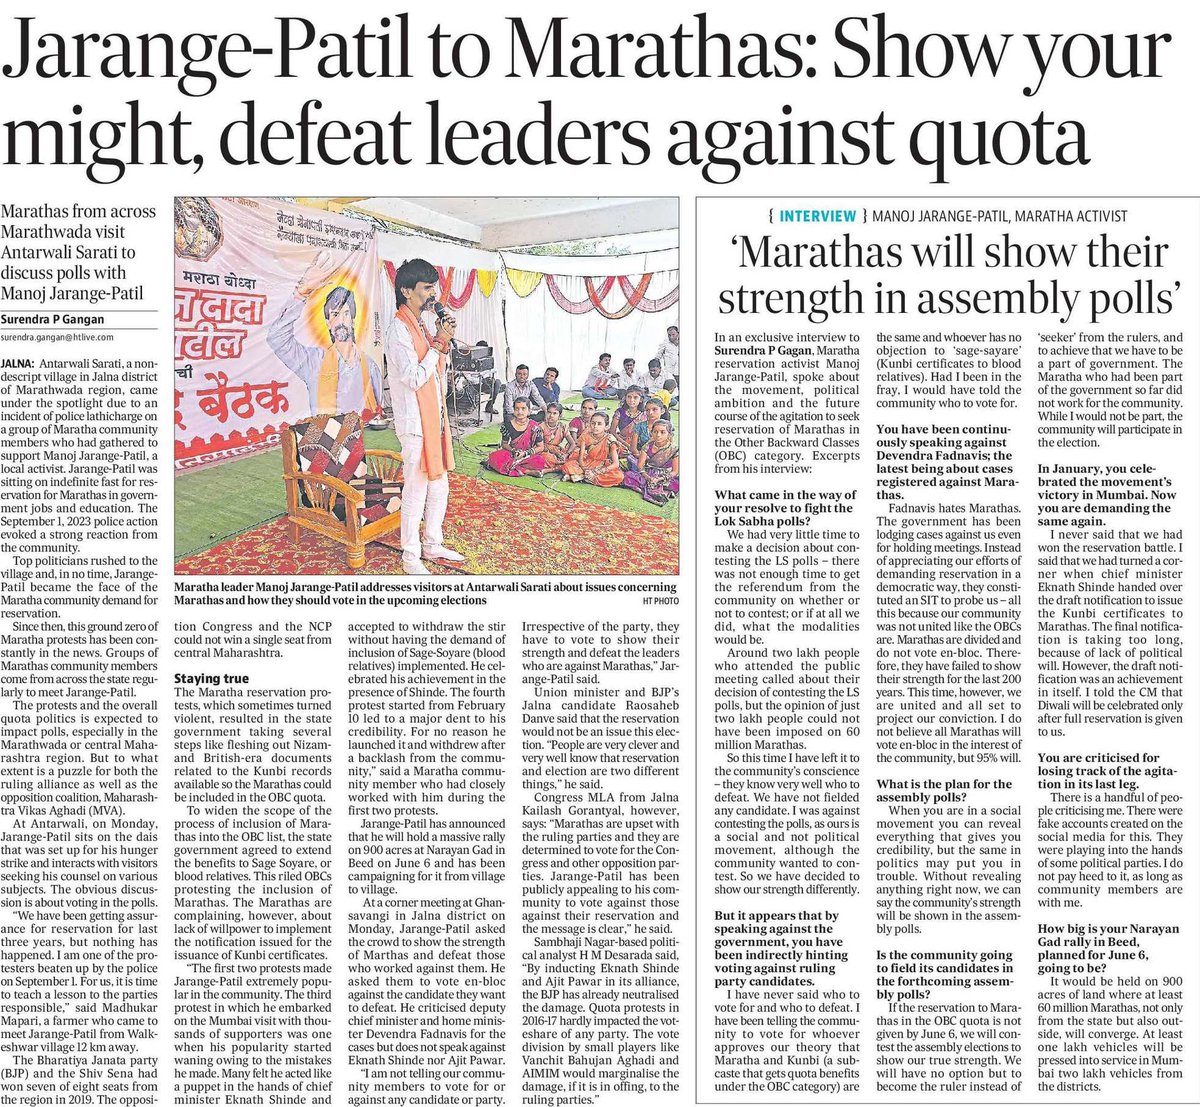 Time for Marathas to show their strength, Jarange-Patil tells HT. Read online: hindustantimes.com/cities/mumbai-…